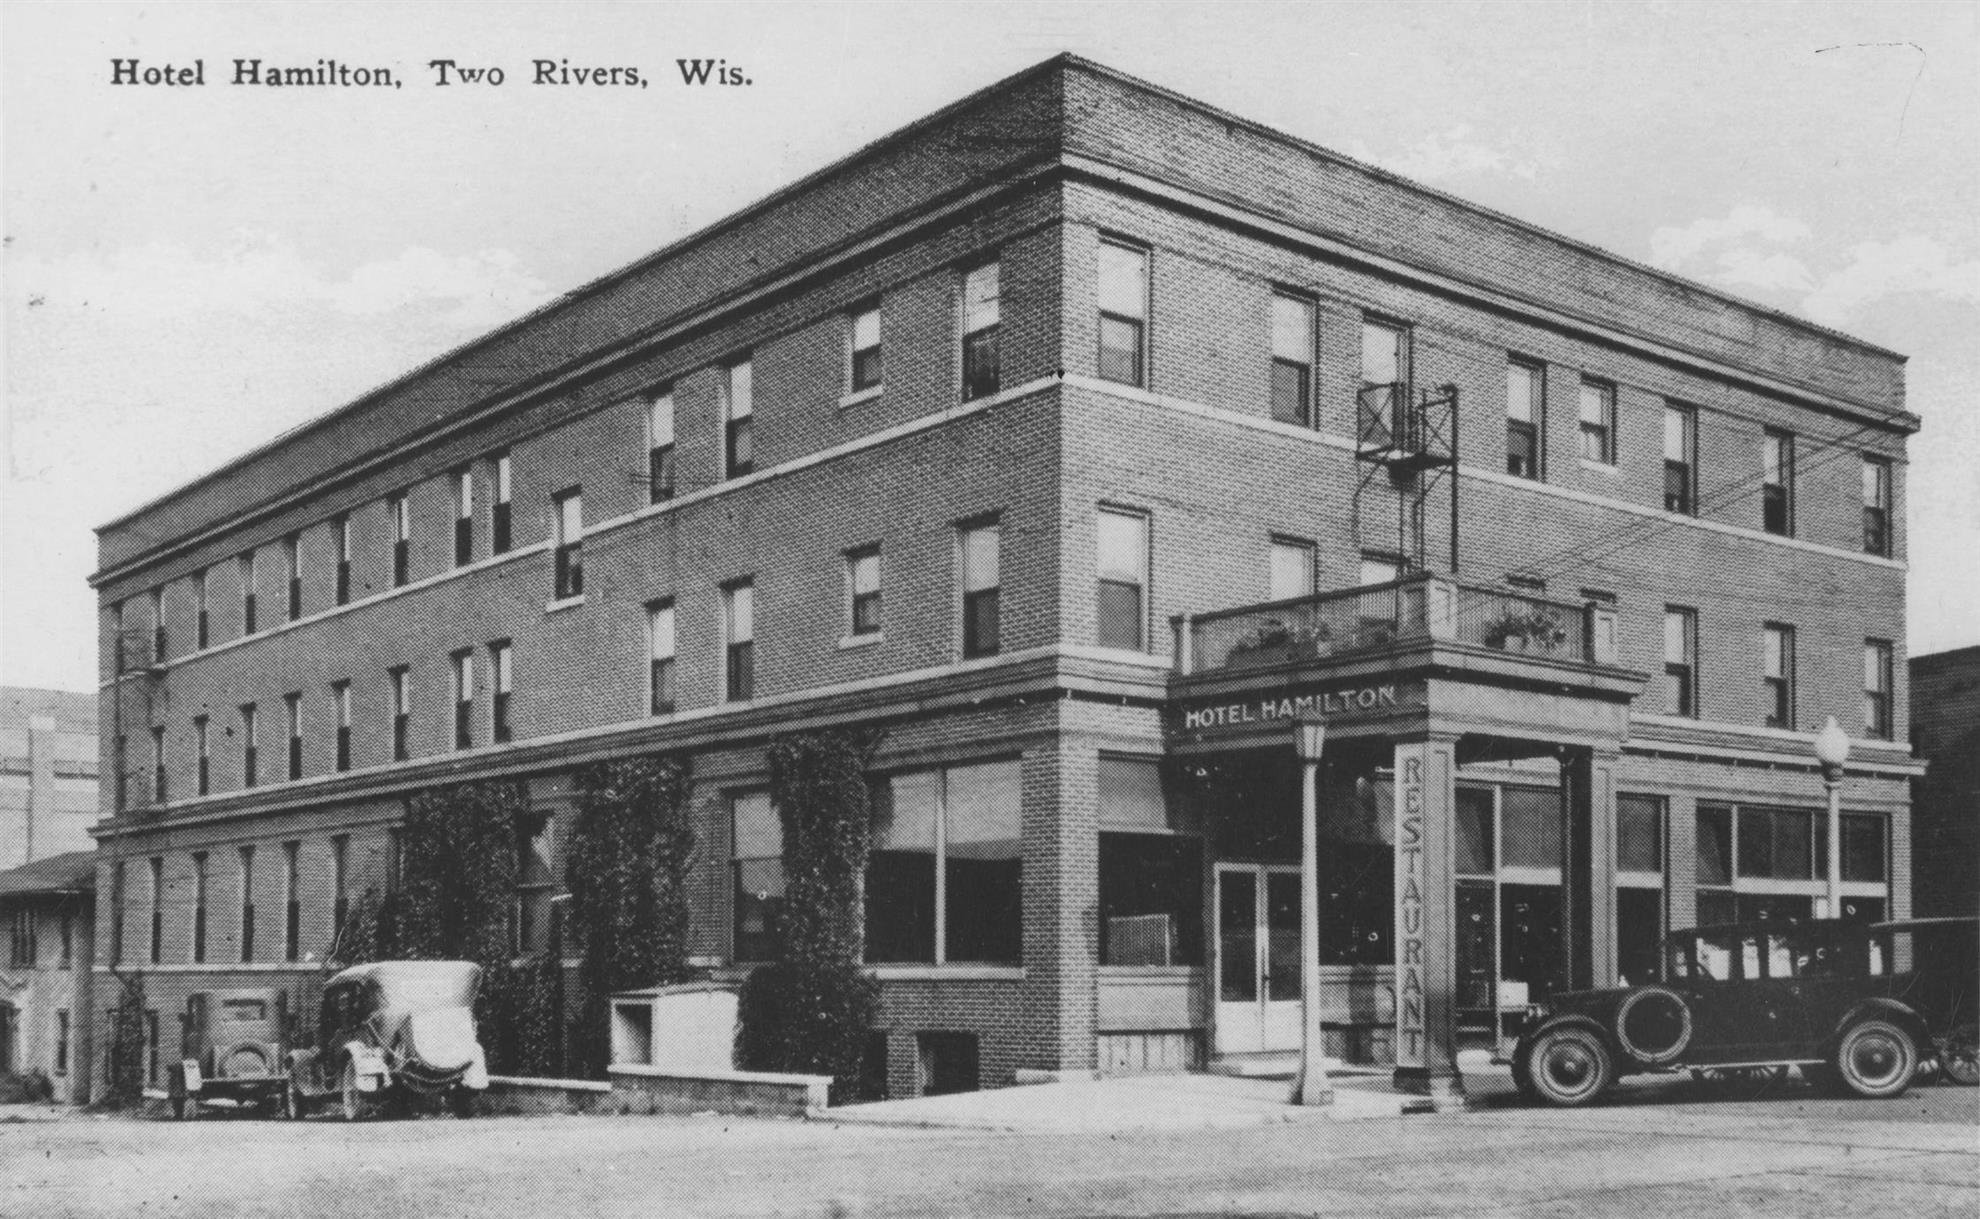 Hotel Hamilton, 1919, photograph from the Lester Public Library